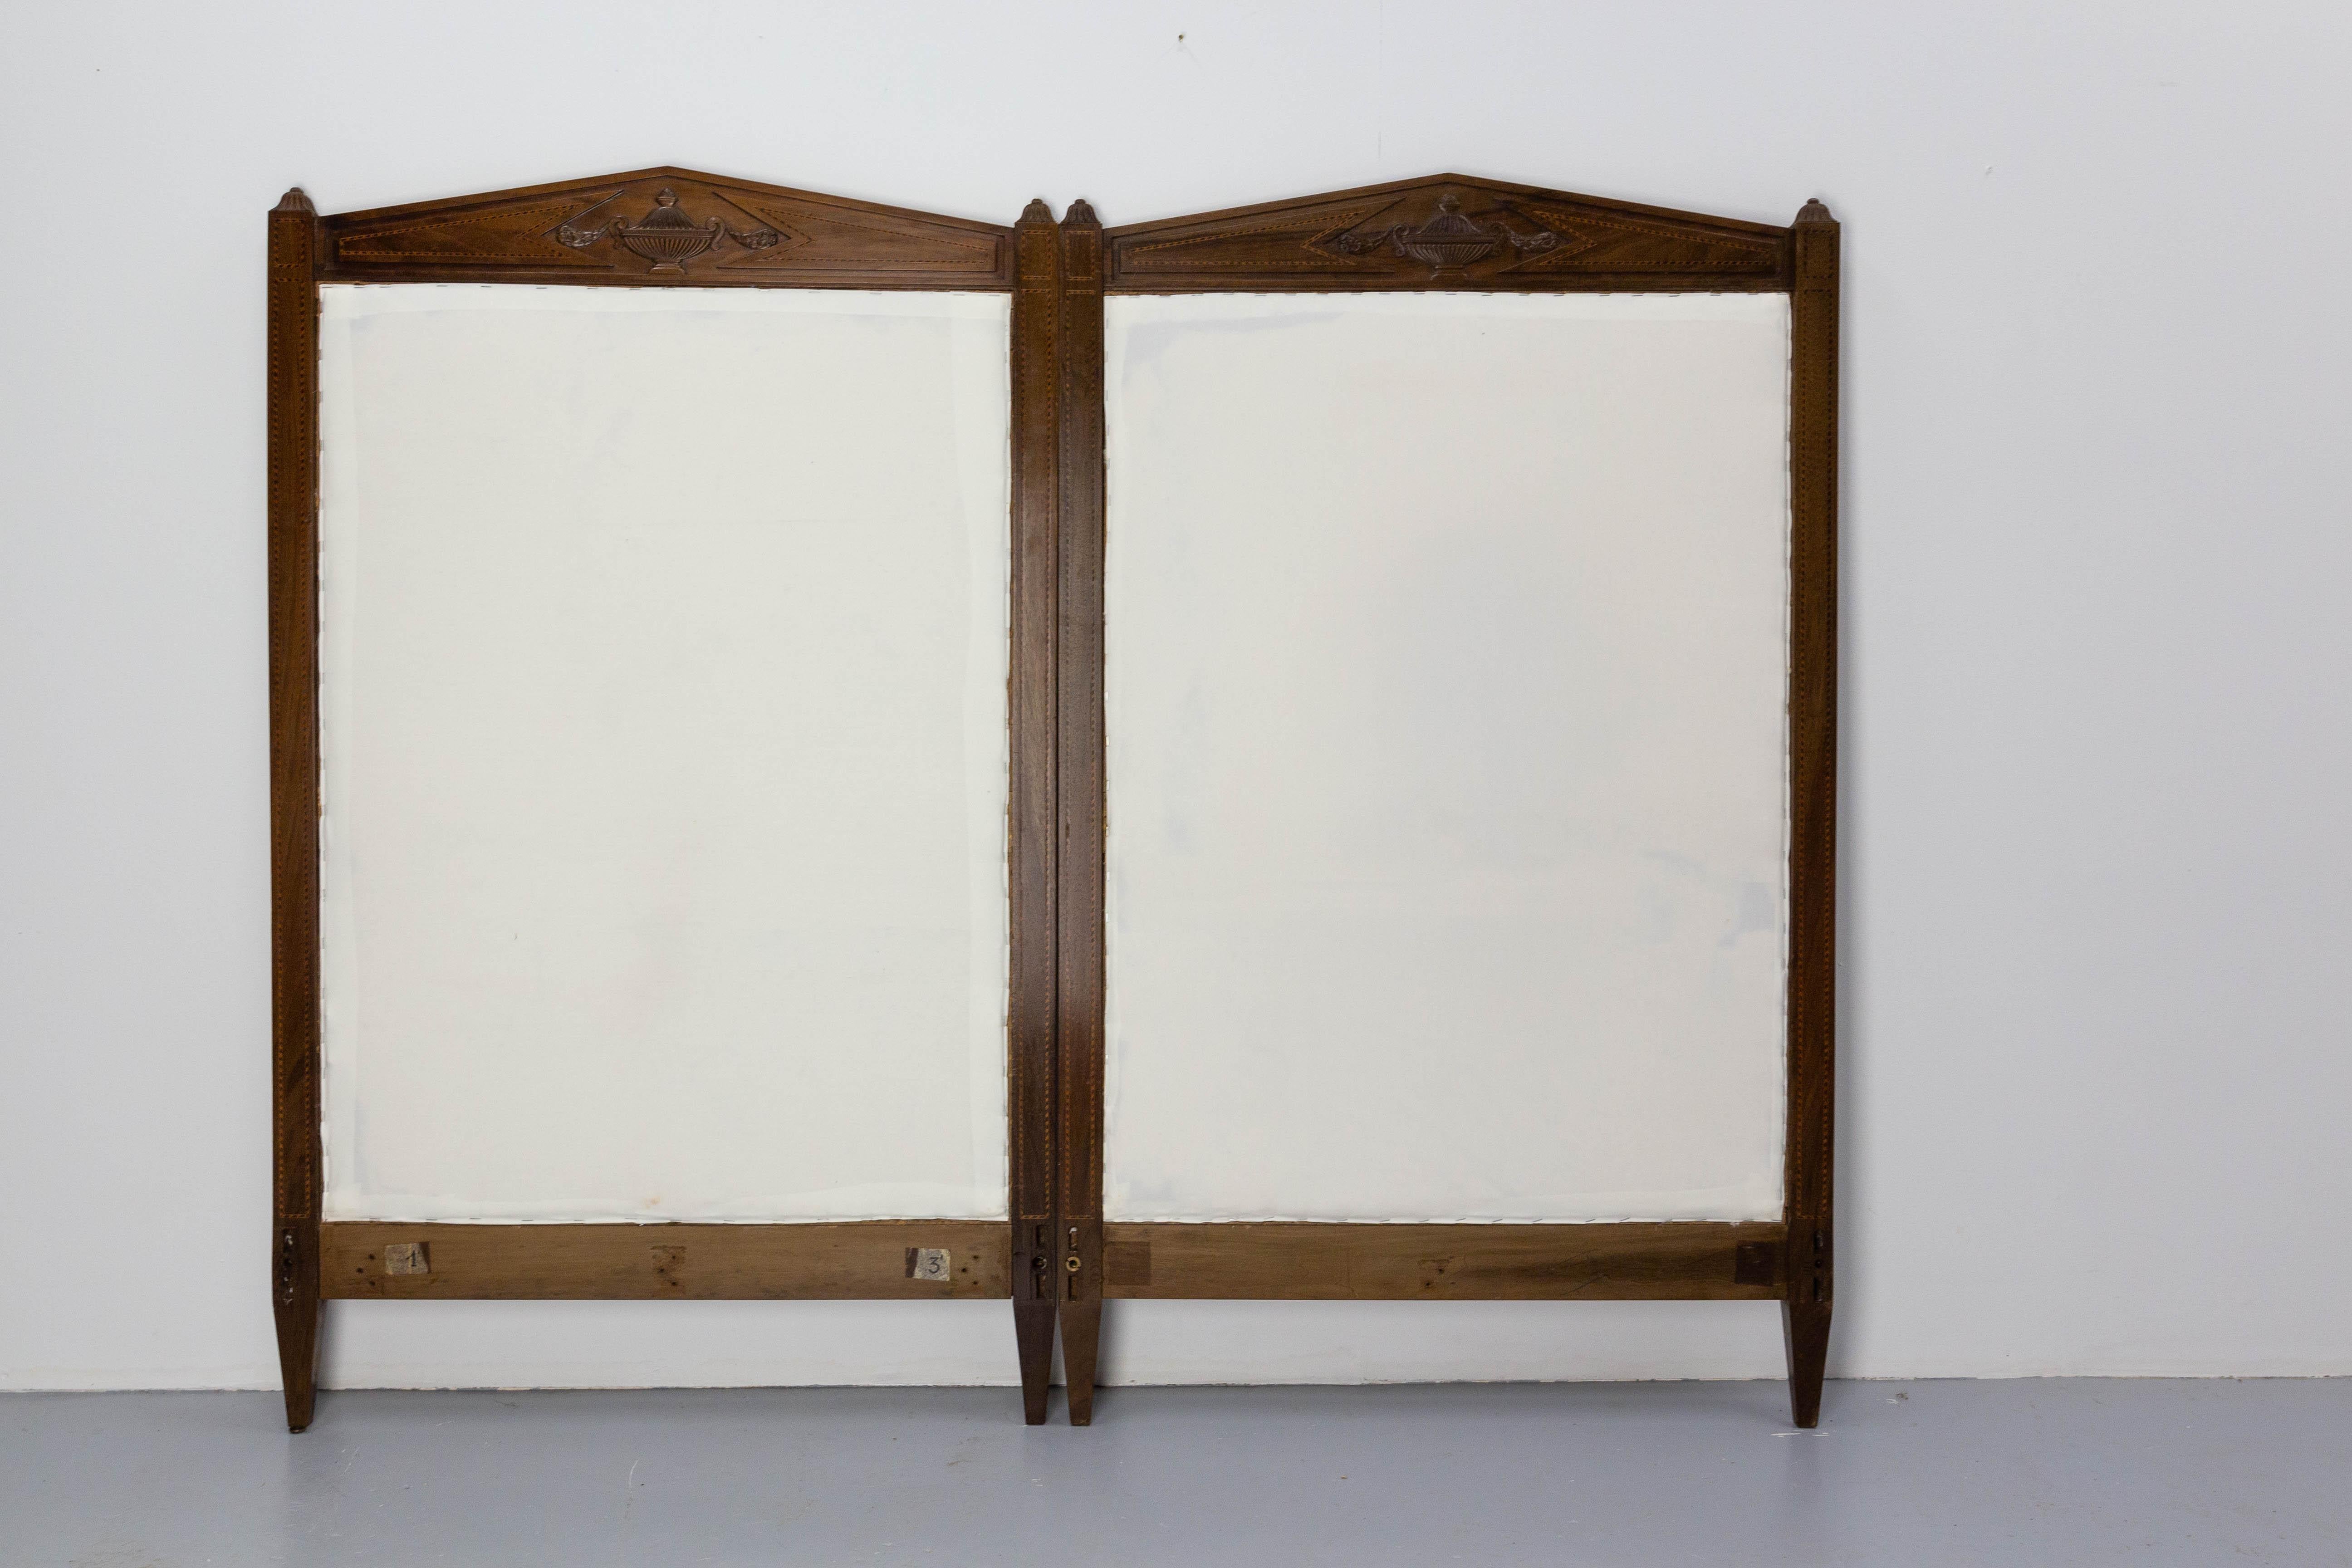 Walnut pair of headboards from the Directoire Period (with period follows the Revolution Period)
French, circa 1800
Very nice marquetry work
The upholstery is ready to be recovered.
Good antique condition with minor signs of use.

Shipping:
8